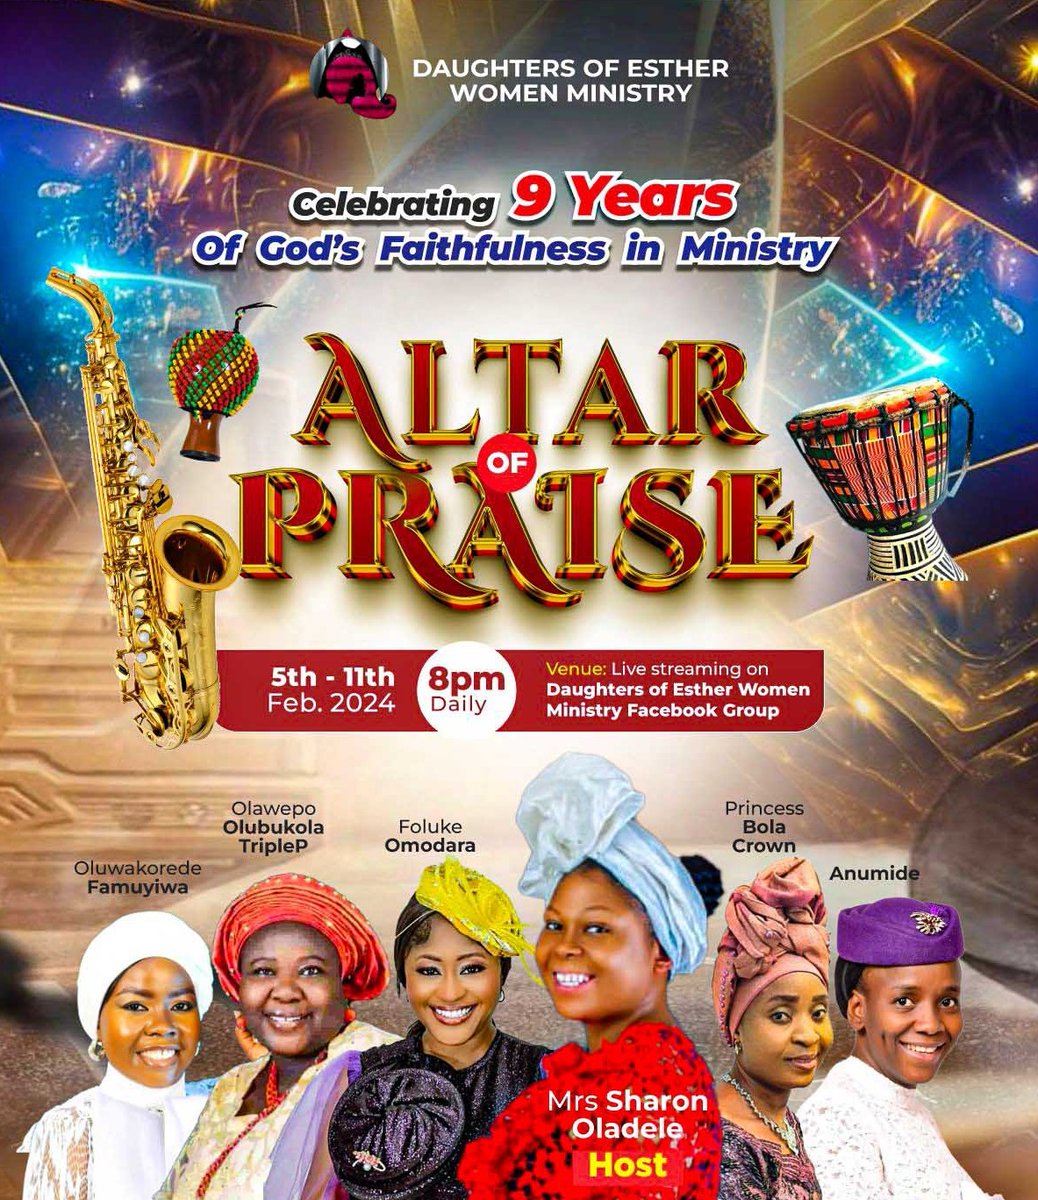 Glory be to God

The Daughters of Esther Women Ministry is 9
Join us today Sun 11th Feb by 8pm on the Daughter of Esther Women Ministry) Facebook Group

You can't afford to miss this

#9thaniiversary  #9 #daughtersofesther #doe #doe@9 #thanksgiving #altarofpraise #appreciation